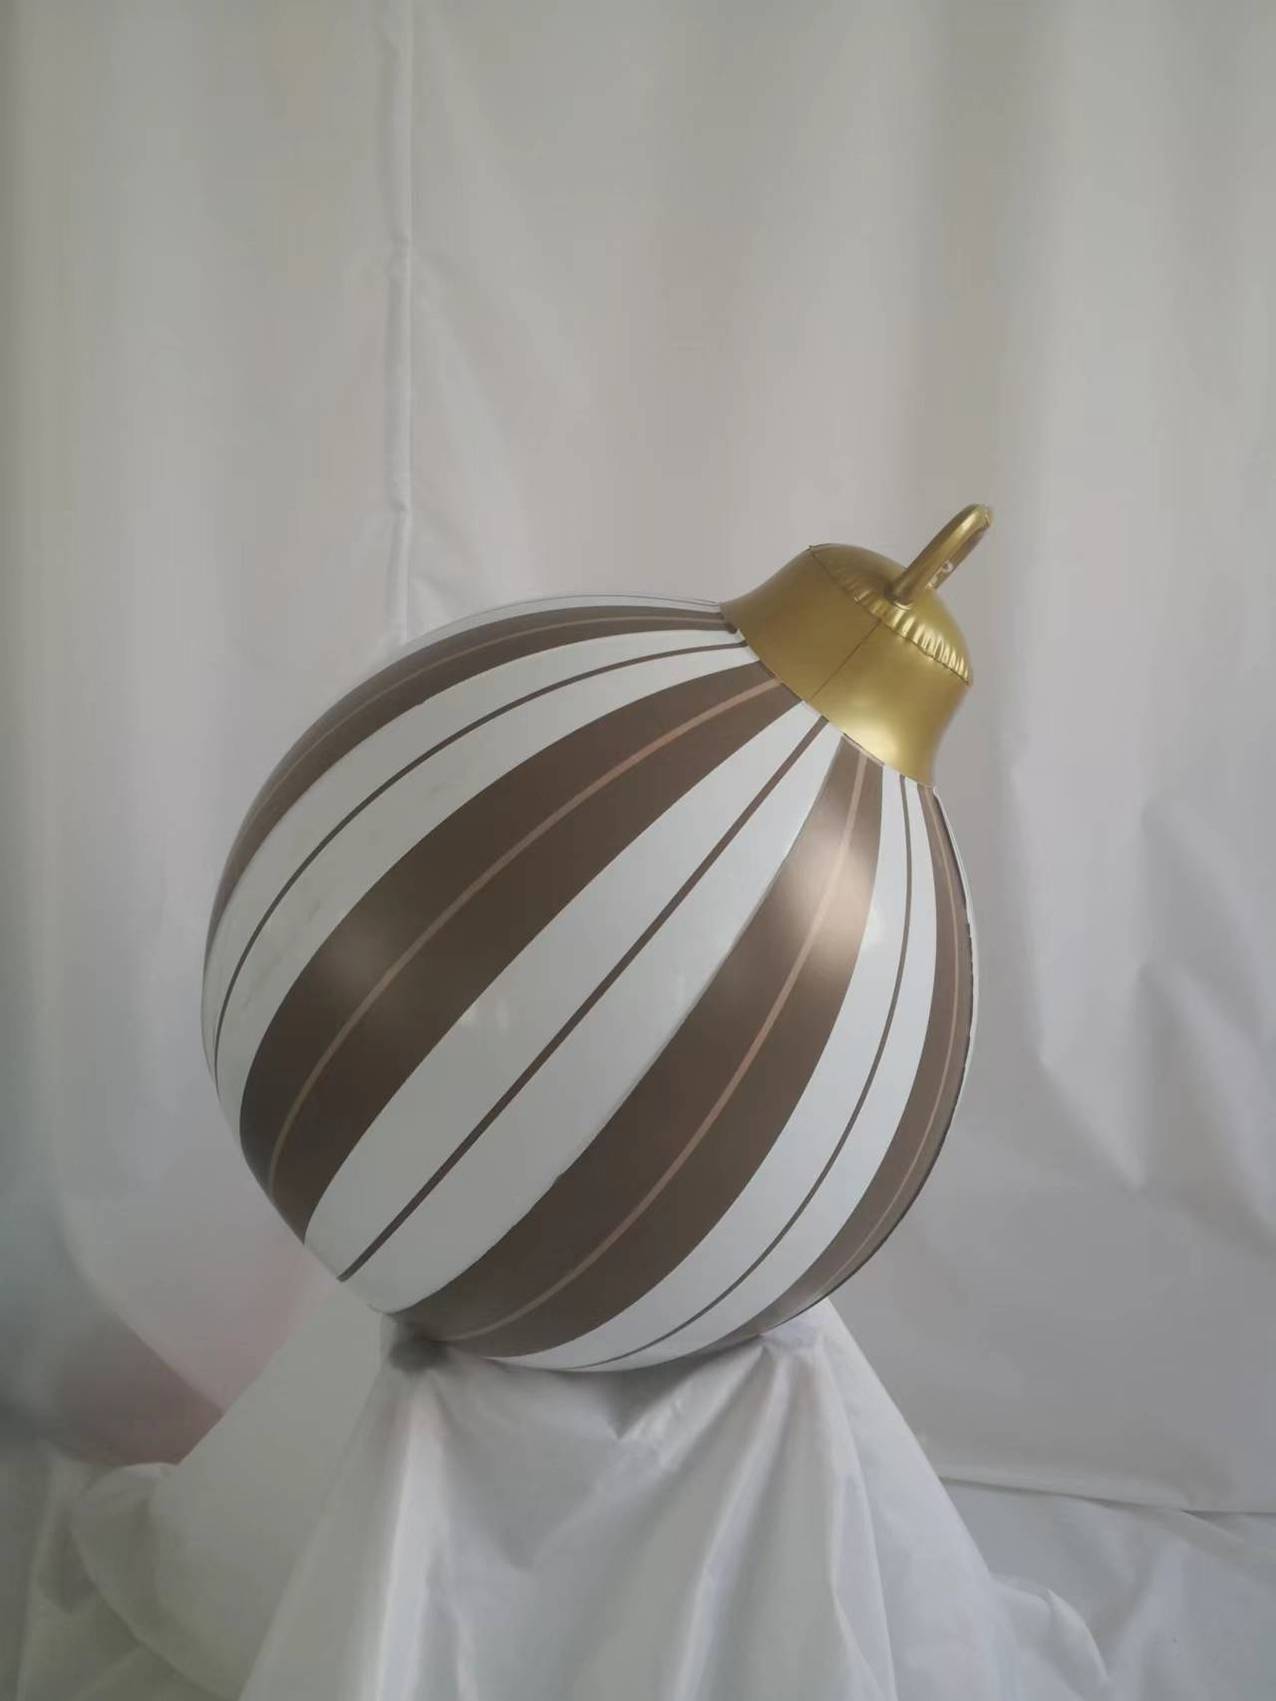 Customised Chistmas Light Up With Led Light & Remote Ornament Ball Balloons